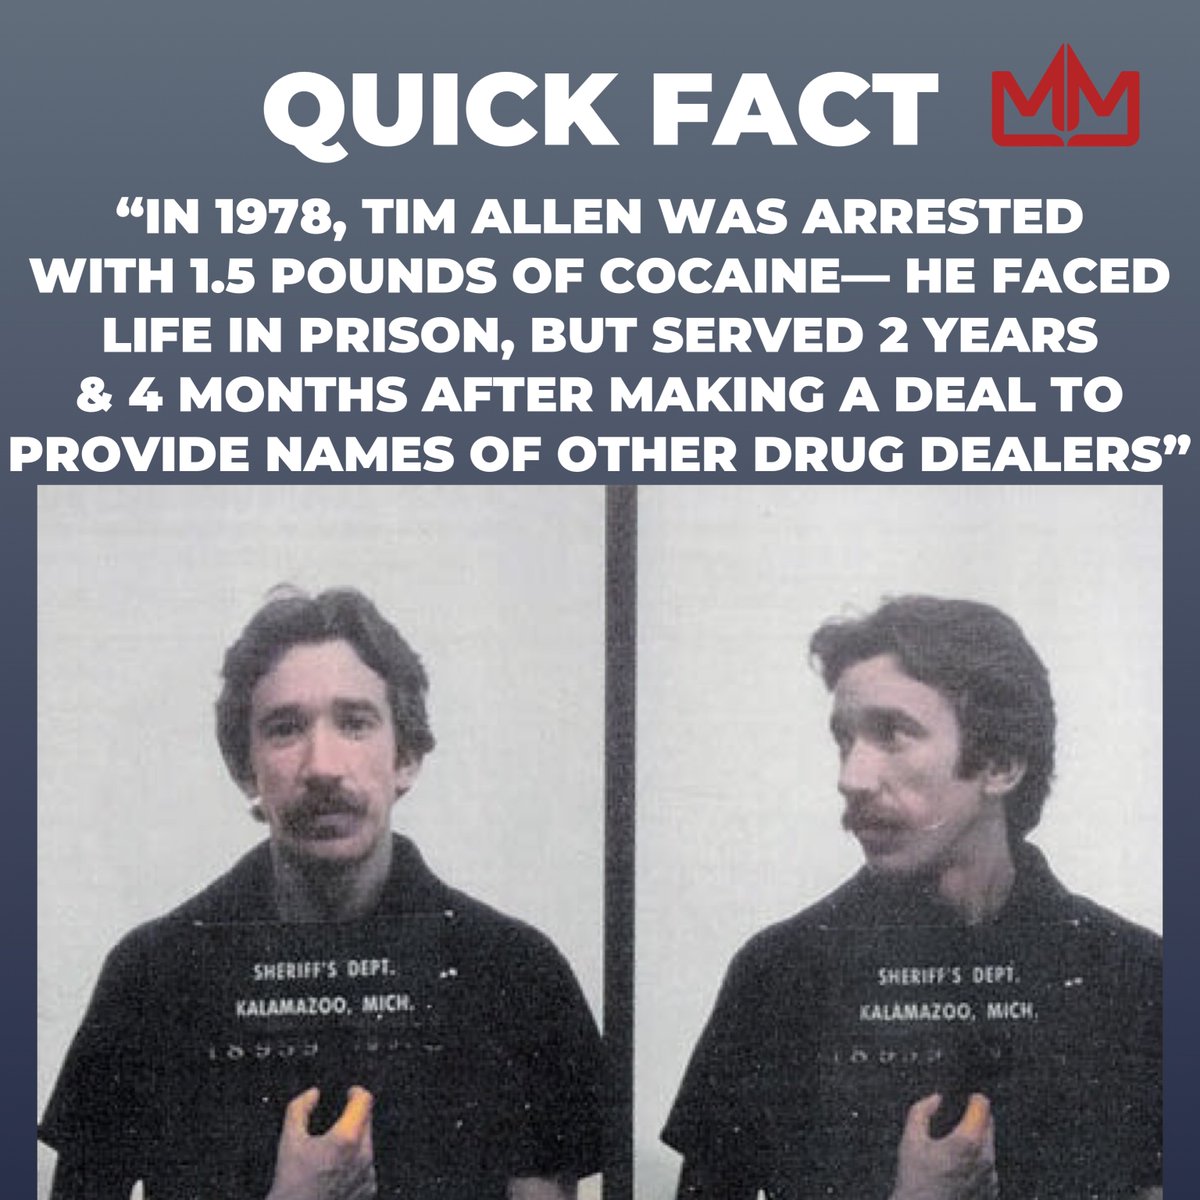 My Mixtapez on Twitter: "Tim Allen really went from getting caught with  cocaine to starring on tv 📺 https://t.co/UPA1tOBGnr" / Twitter